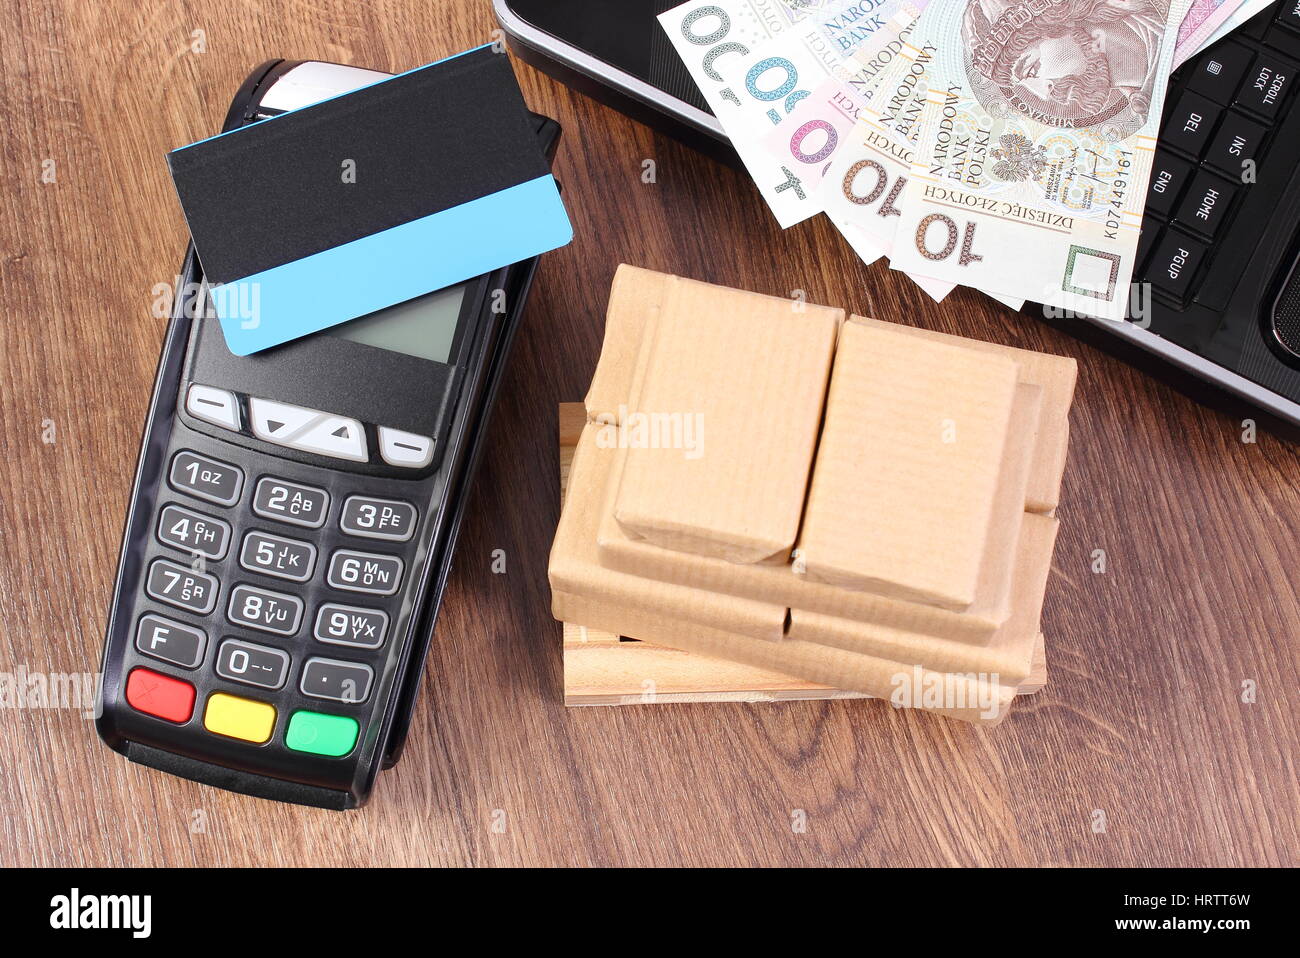 Payment terminal with contactless credit card, polish currency money, laptop and small wrapped boxes on wooden pallet, paying for products and shippin Stock Photo